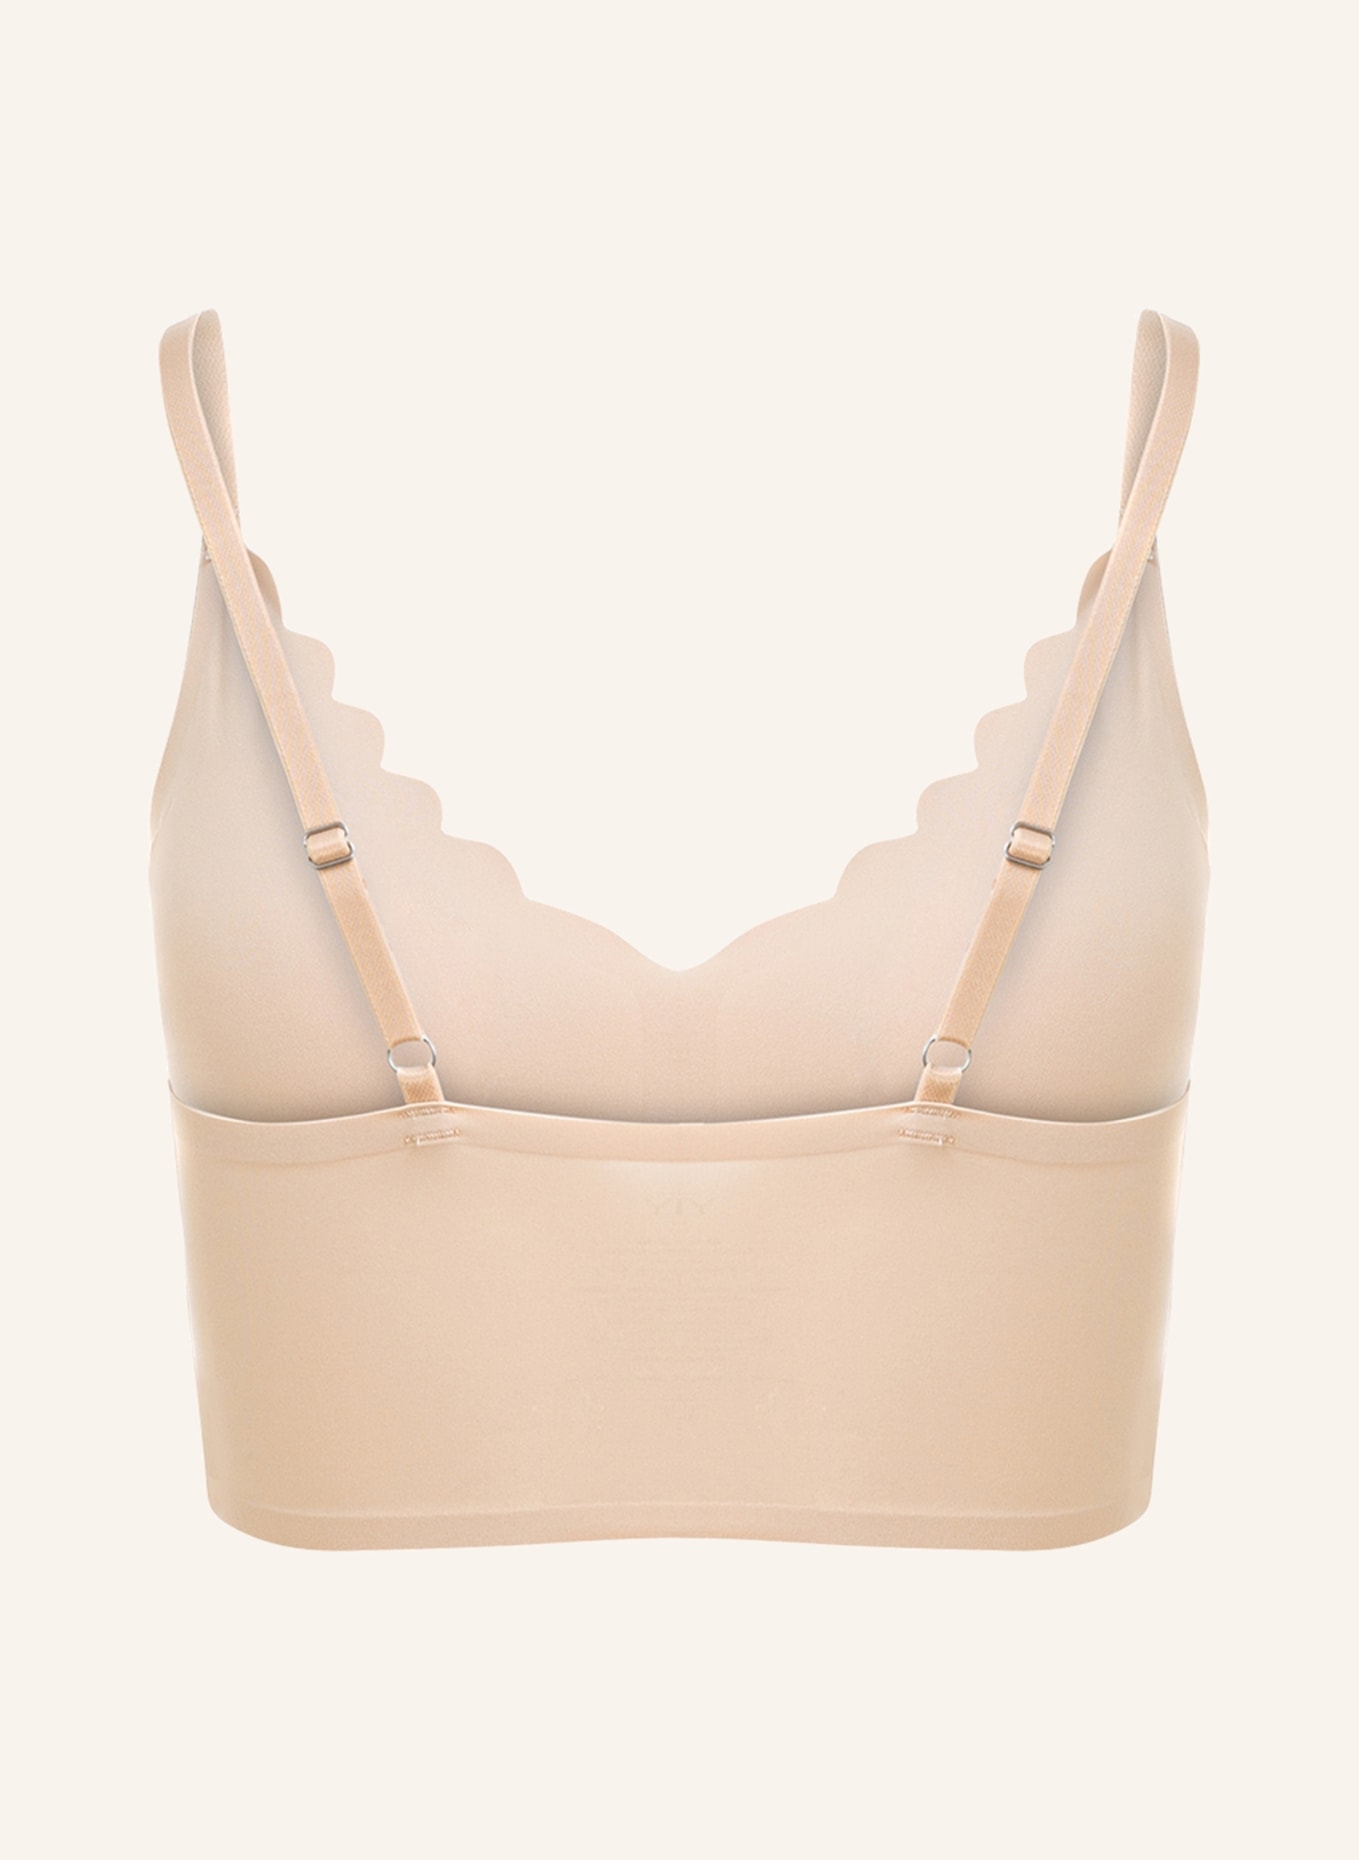 Skiny Bustier EVERY DAY IN MICRO ESSENTIALS, Farbe: NUDE (Bild 2)